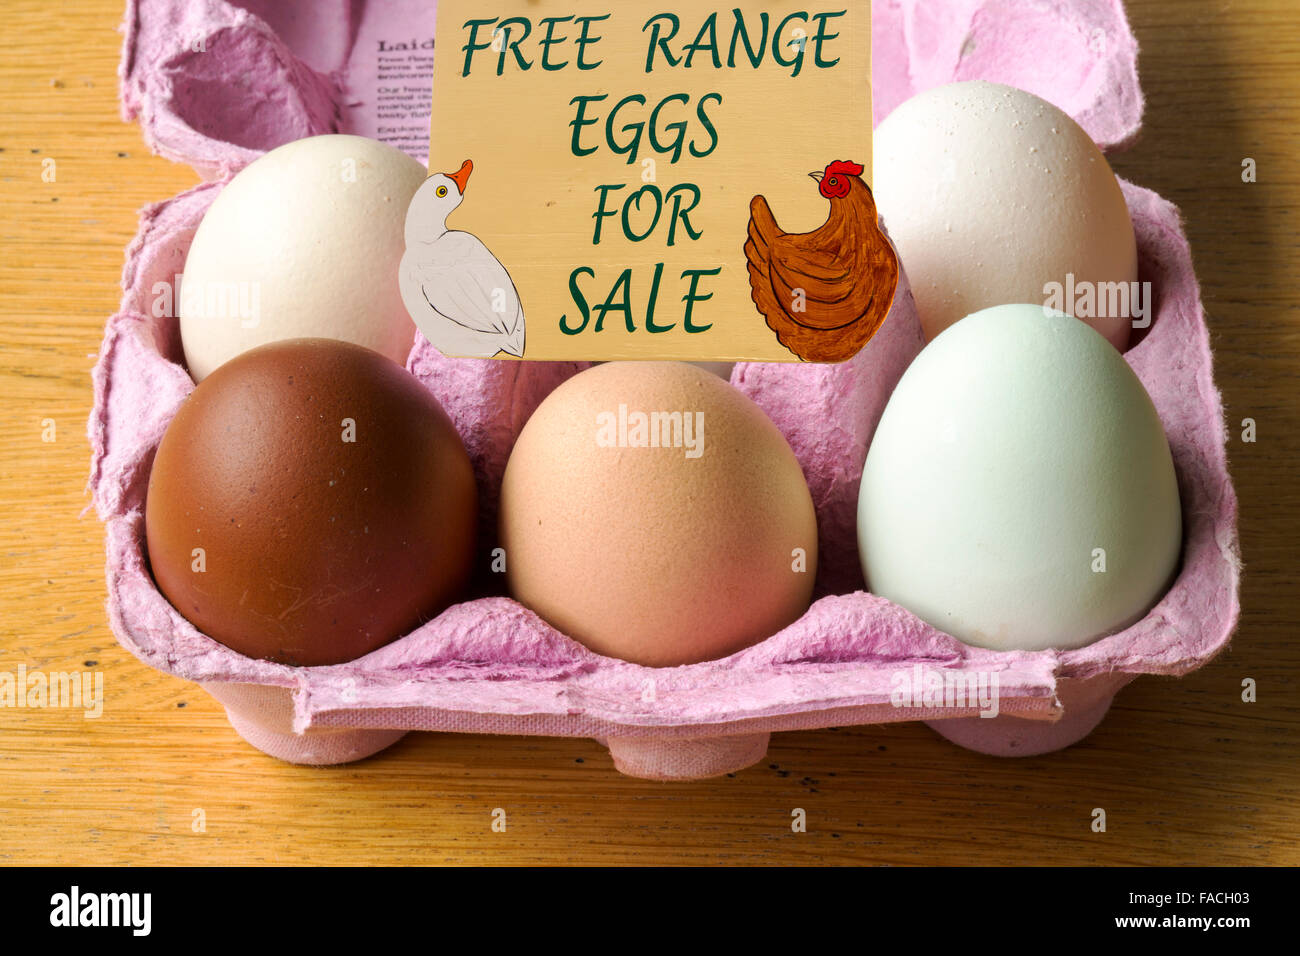 Free range eggs from happy chickens of different breeds. Stock Photo